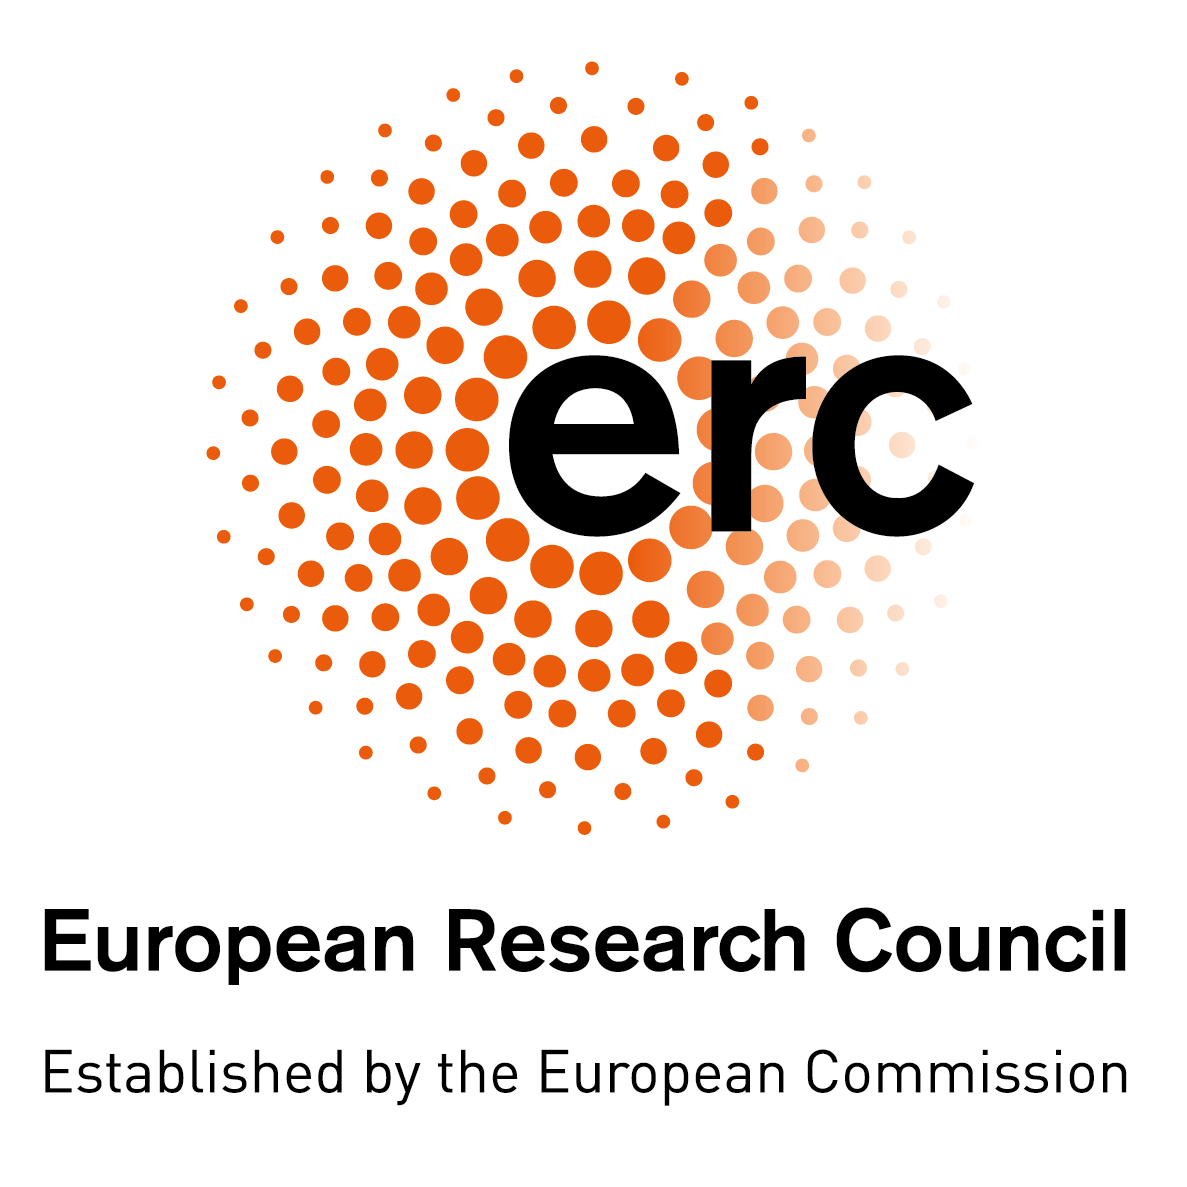 Research Logo - Communicating your research. ERC: European Research Council